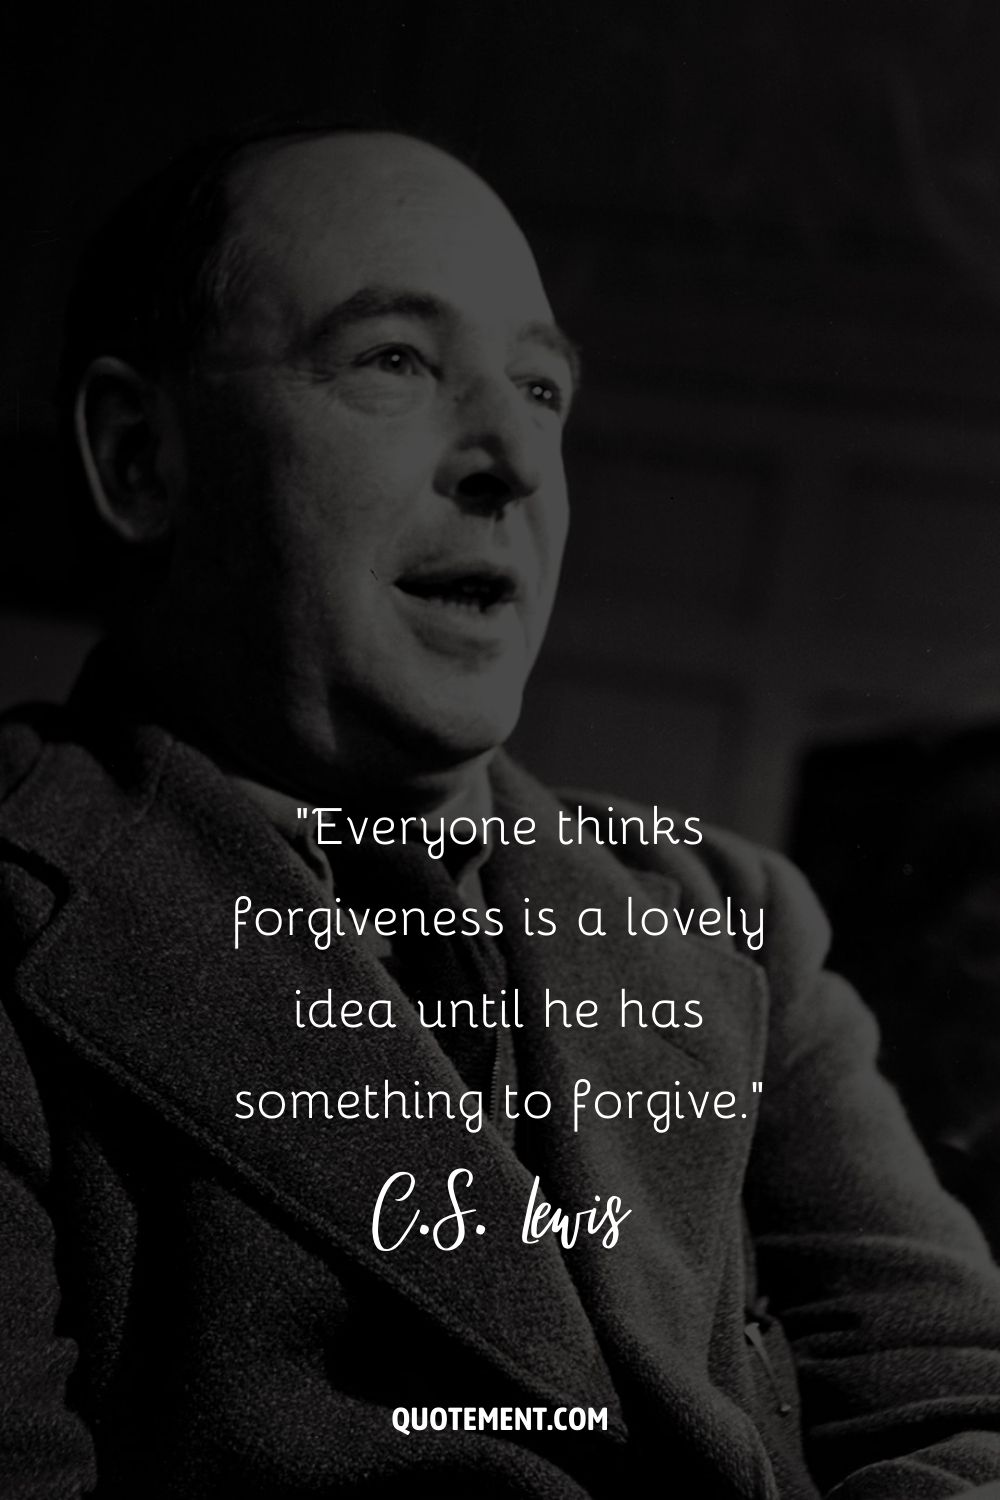 C.S. Lewis with his open mouth suggesting a moment of expression